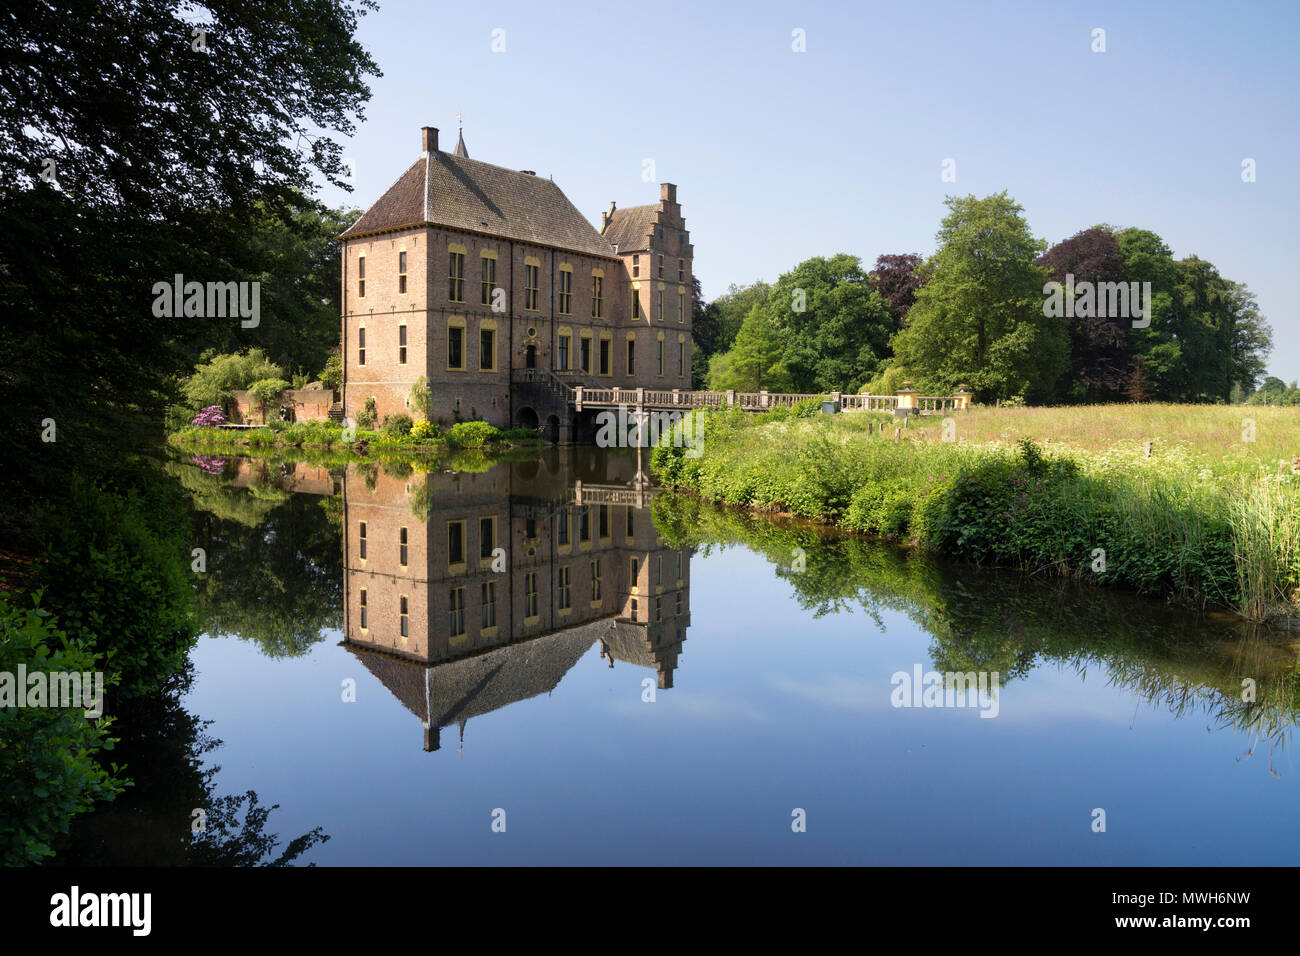 The beautiful castle Vorden in the village of the same name in the Achterhoek, reflecting in its moat Stock Photo